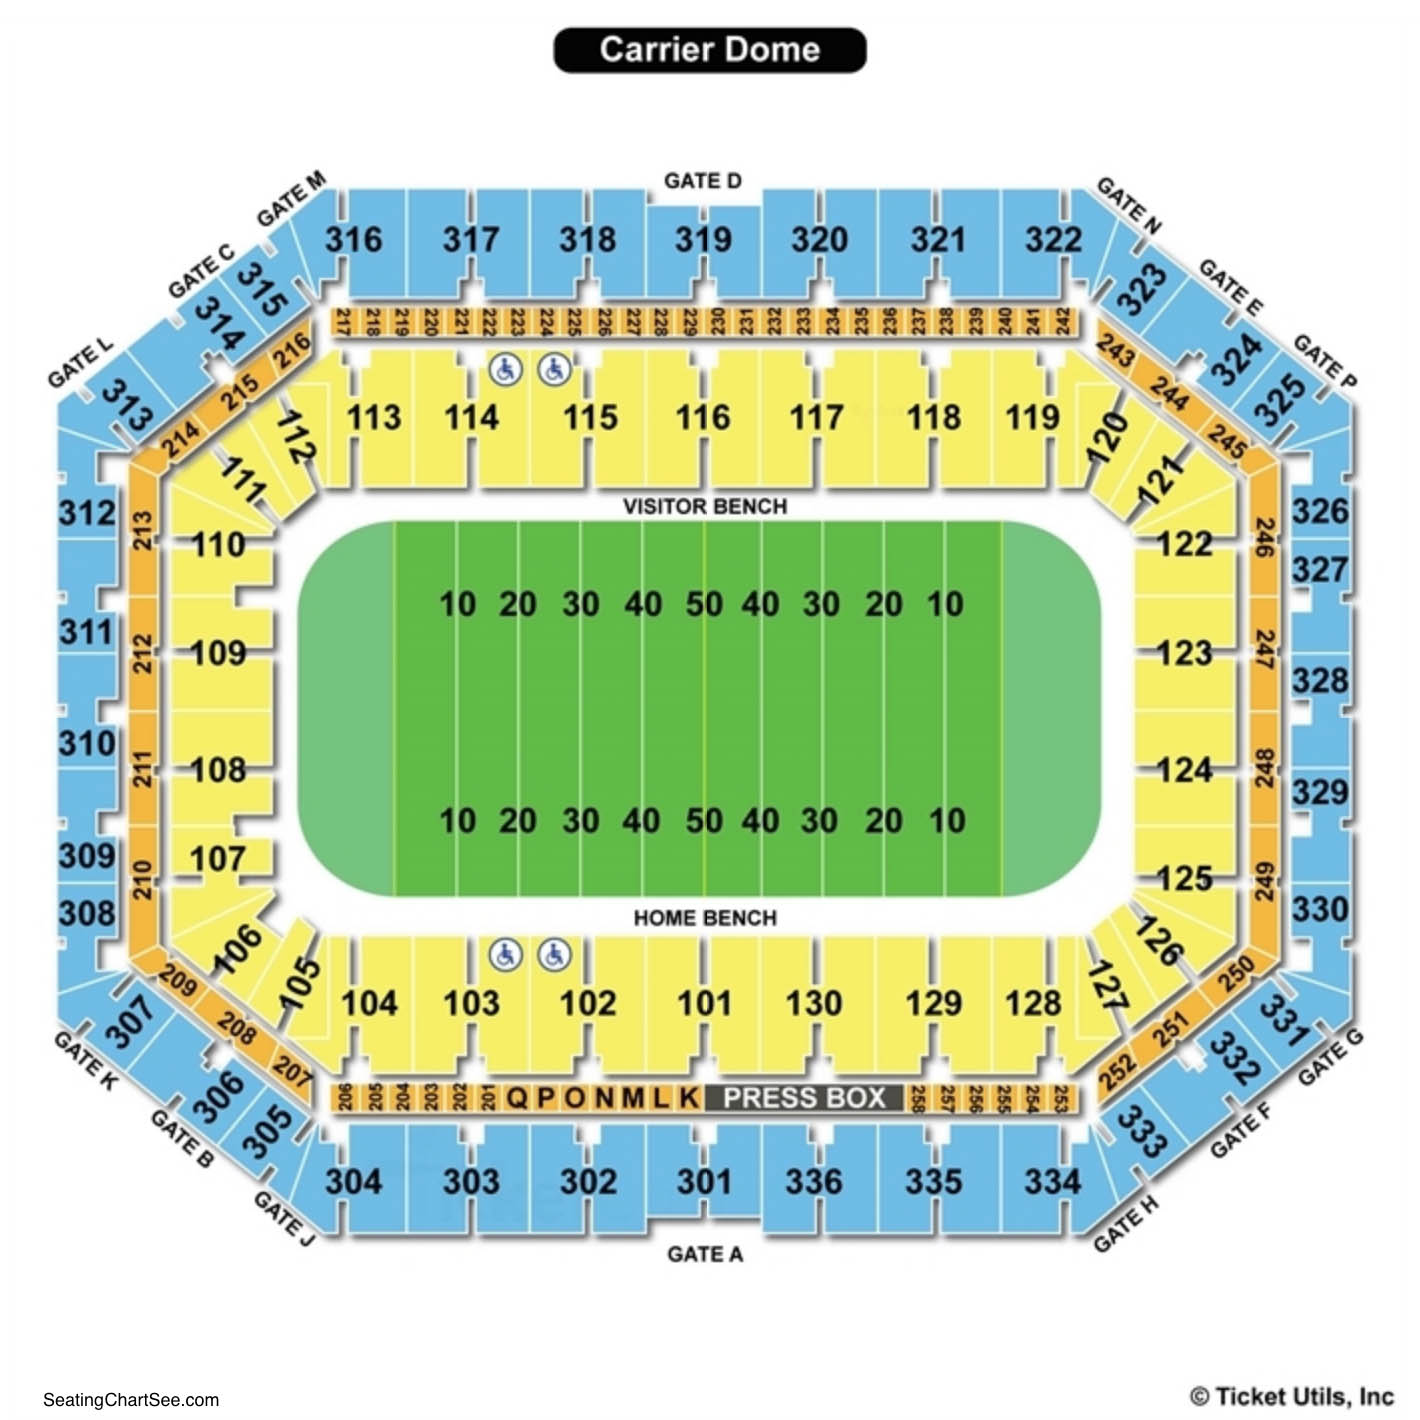 Carrier Dome Seating Charts And Views Games Answers And Cheats